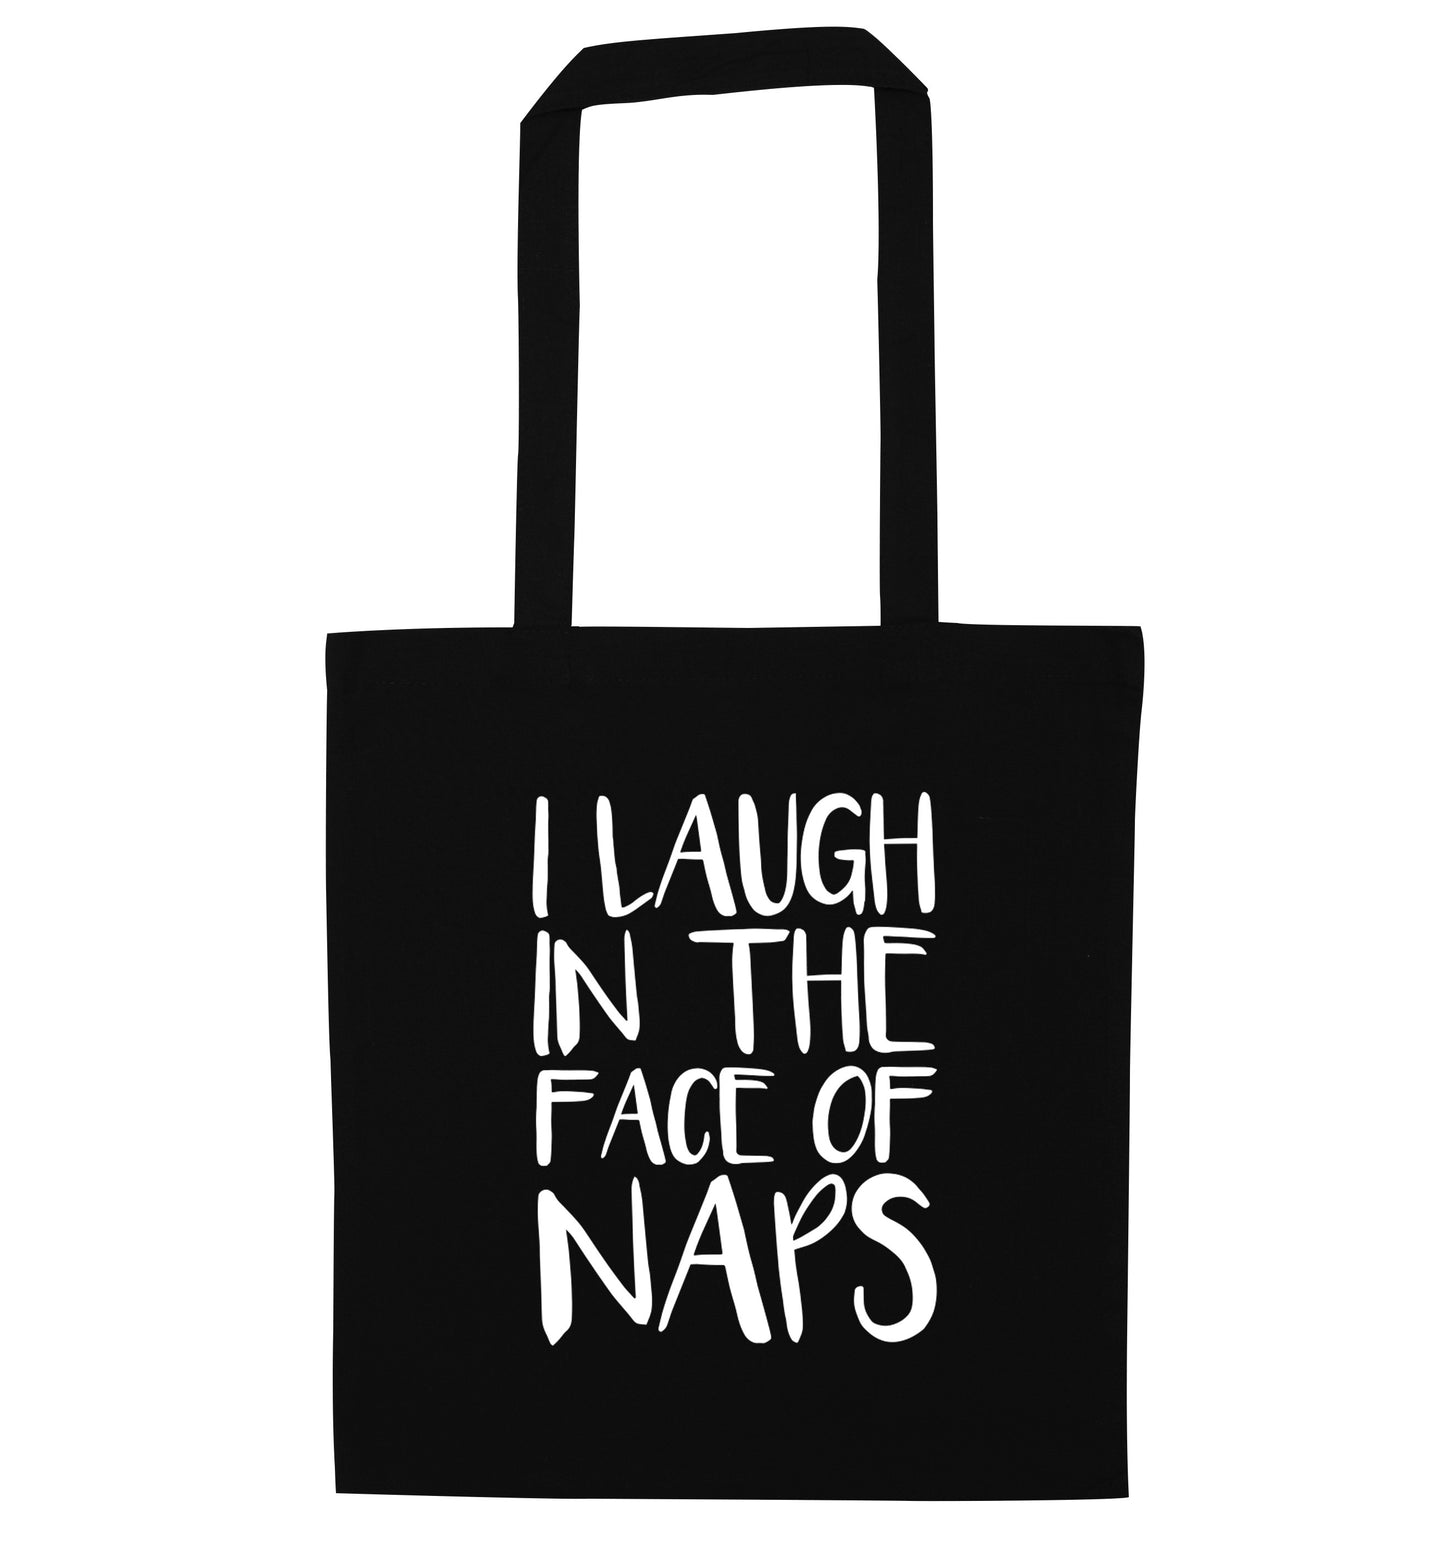 I laugh in the face of naps black tote bag